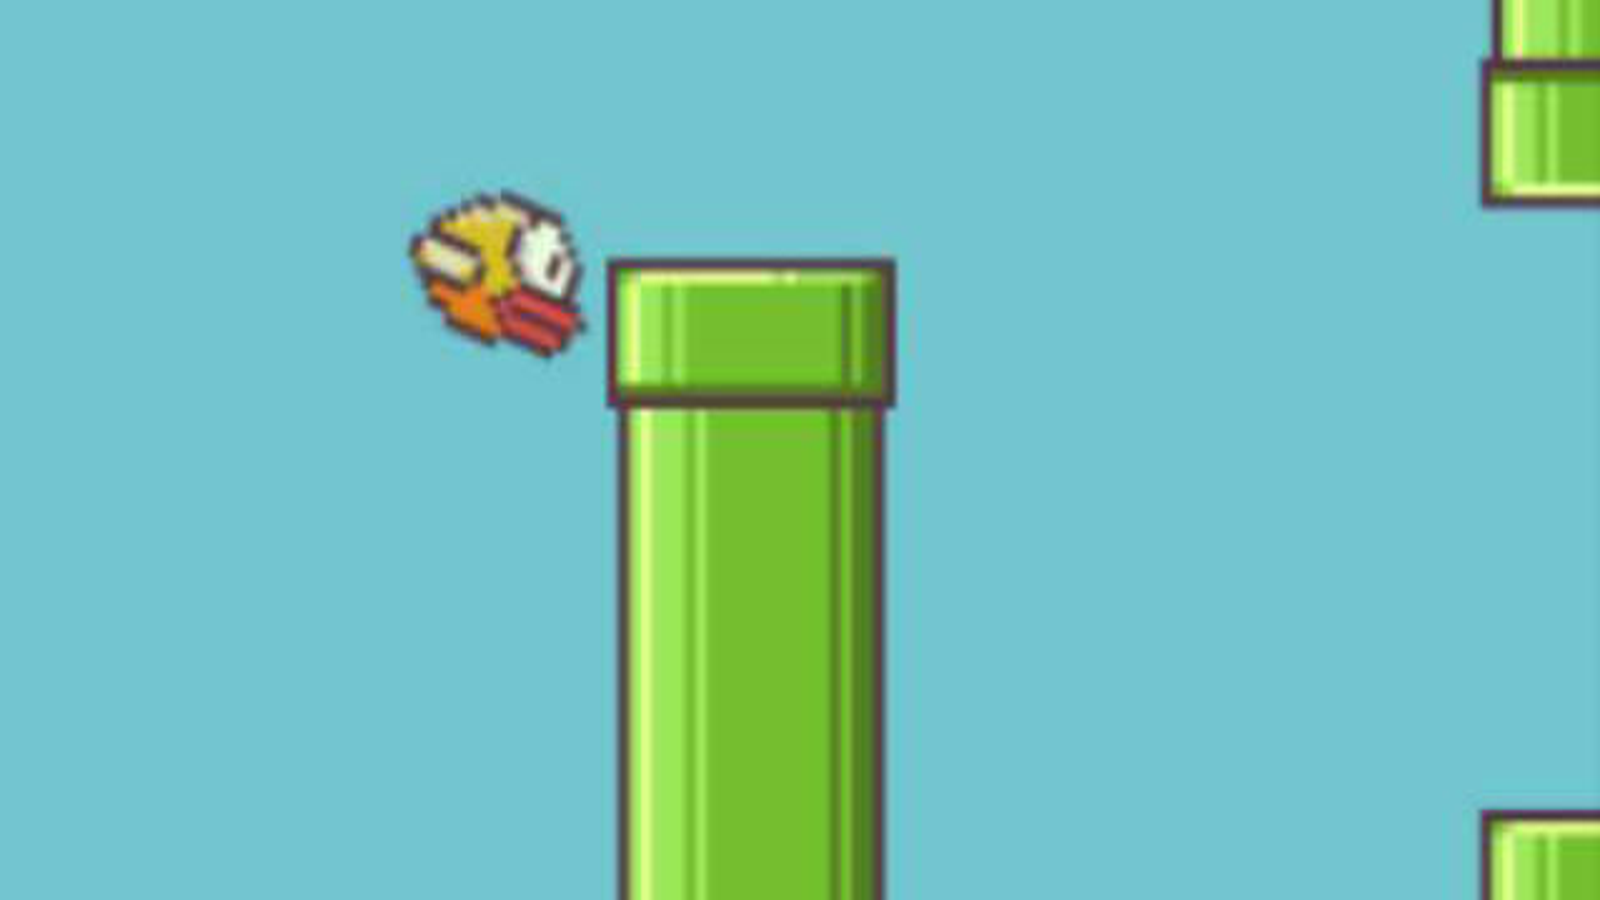 Flappy Bird' Makes $50,000 A Day: Will Nintendo Take Notice?